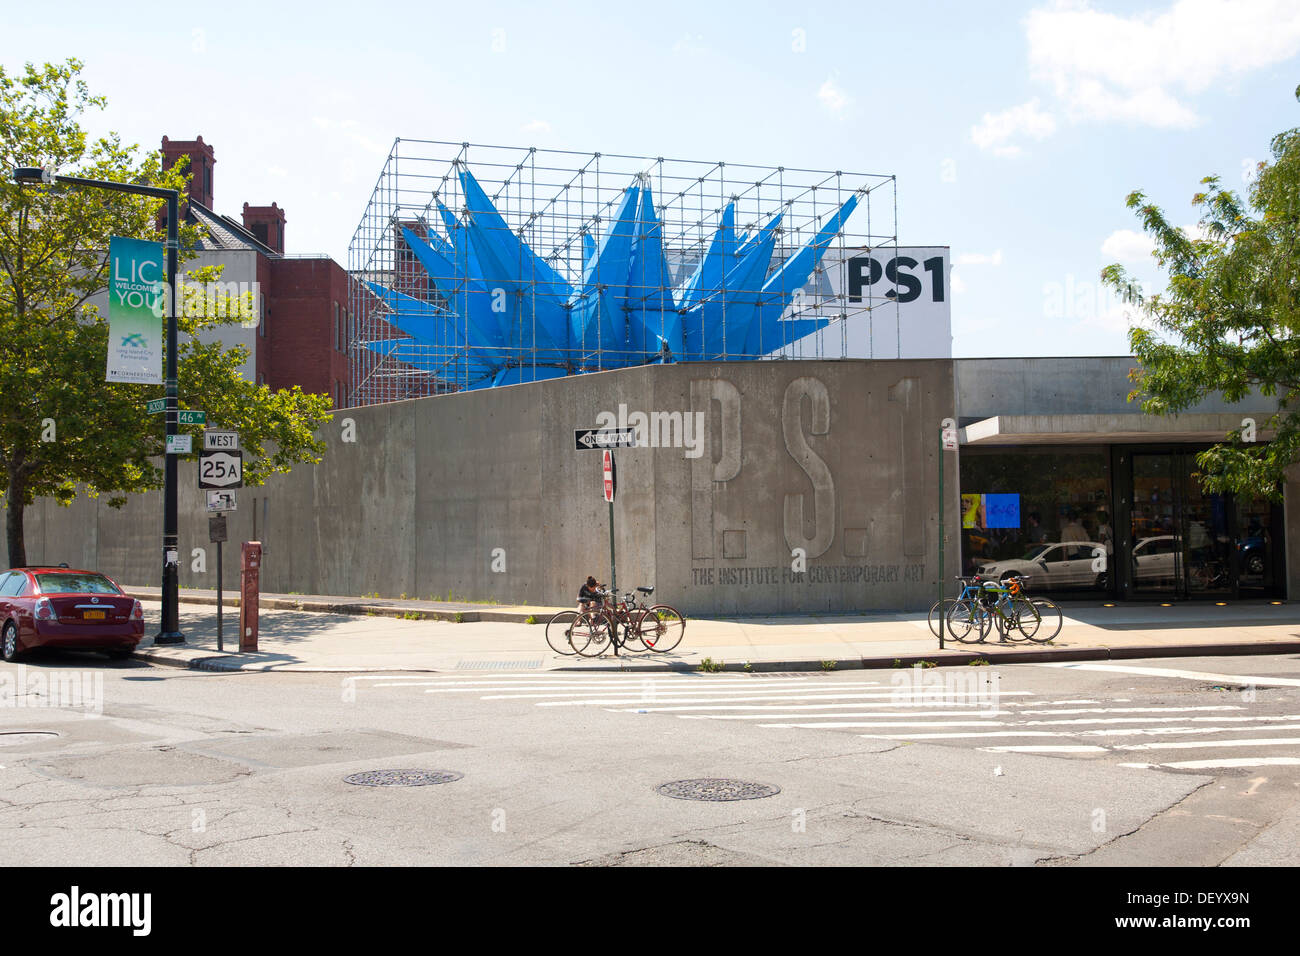 PS1, Institute for Art, branch of MoMA, Museum Modern Art, Queens, New York City, USA Stock Photo - Alamy